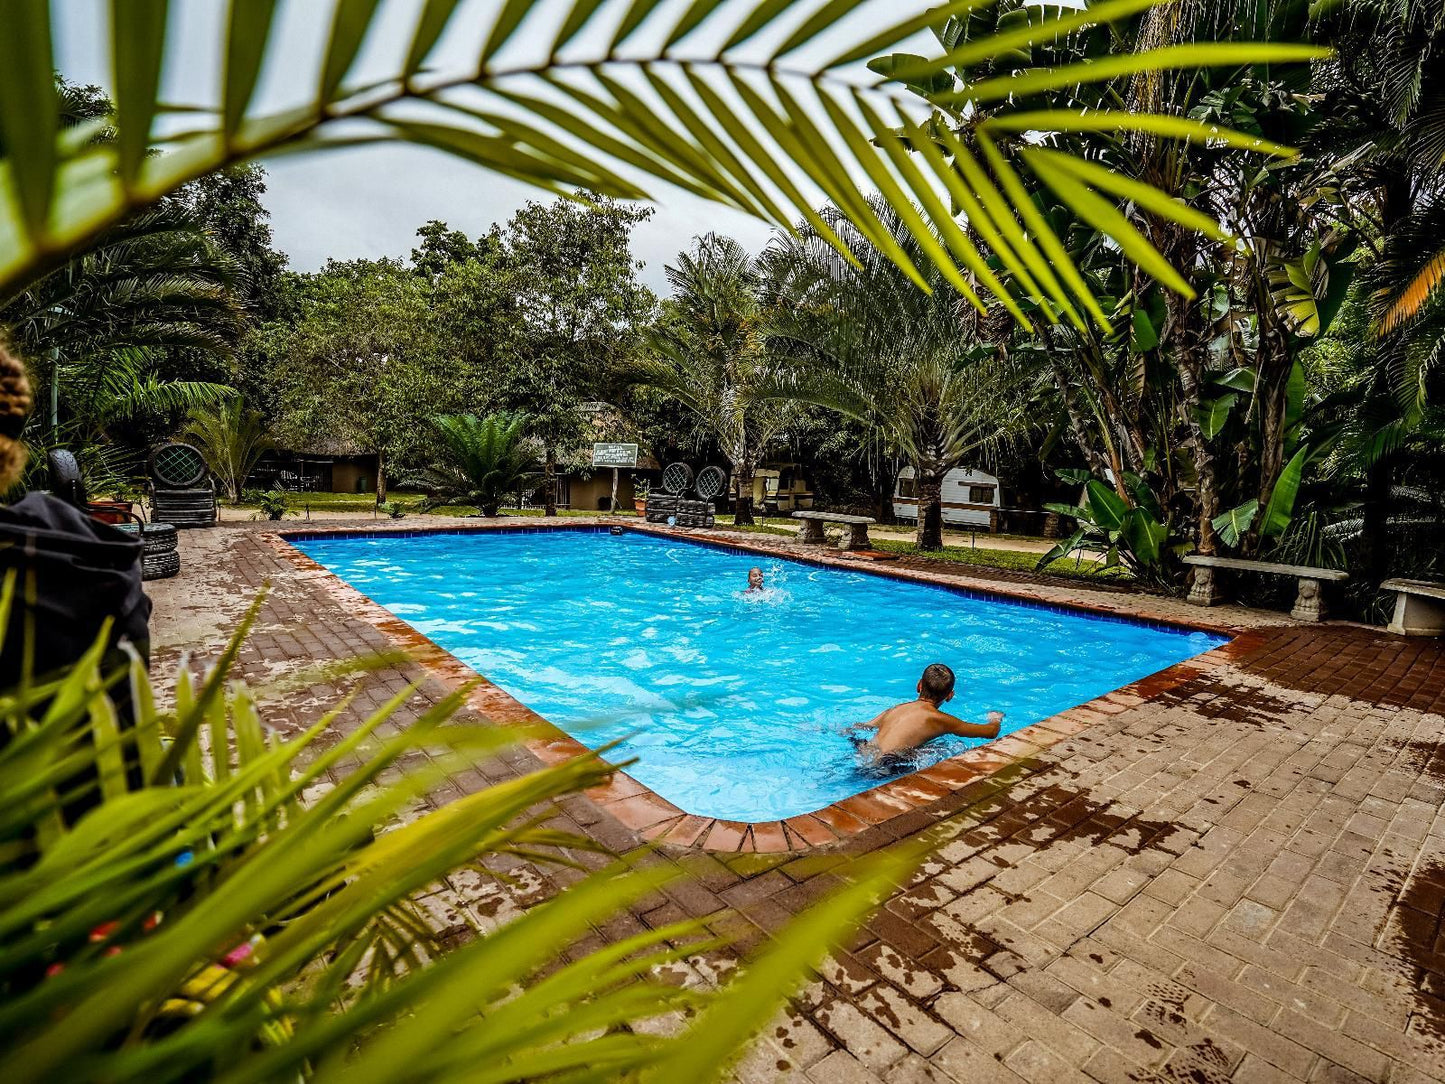 Africamps At Hoedspruit Klaserie Limpopo Province South Africa Palm Tree, Plant, Nature, Wood, Garden, Swimming Pool